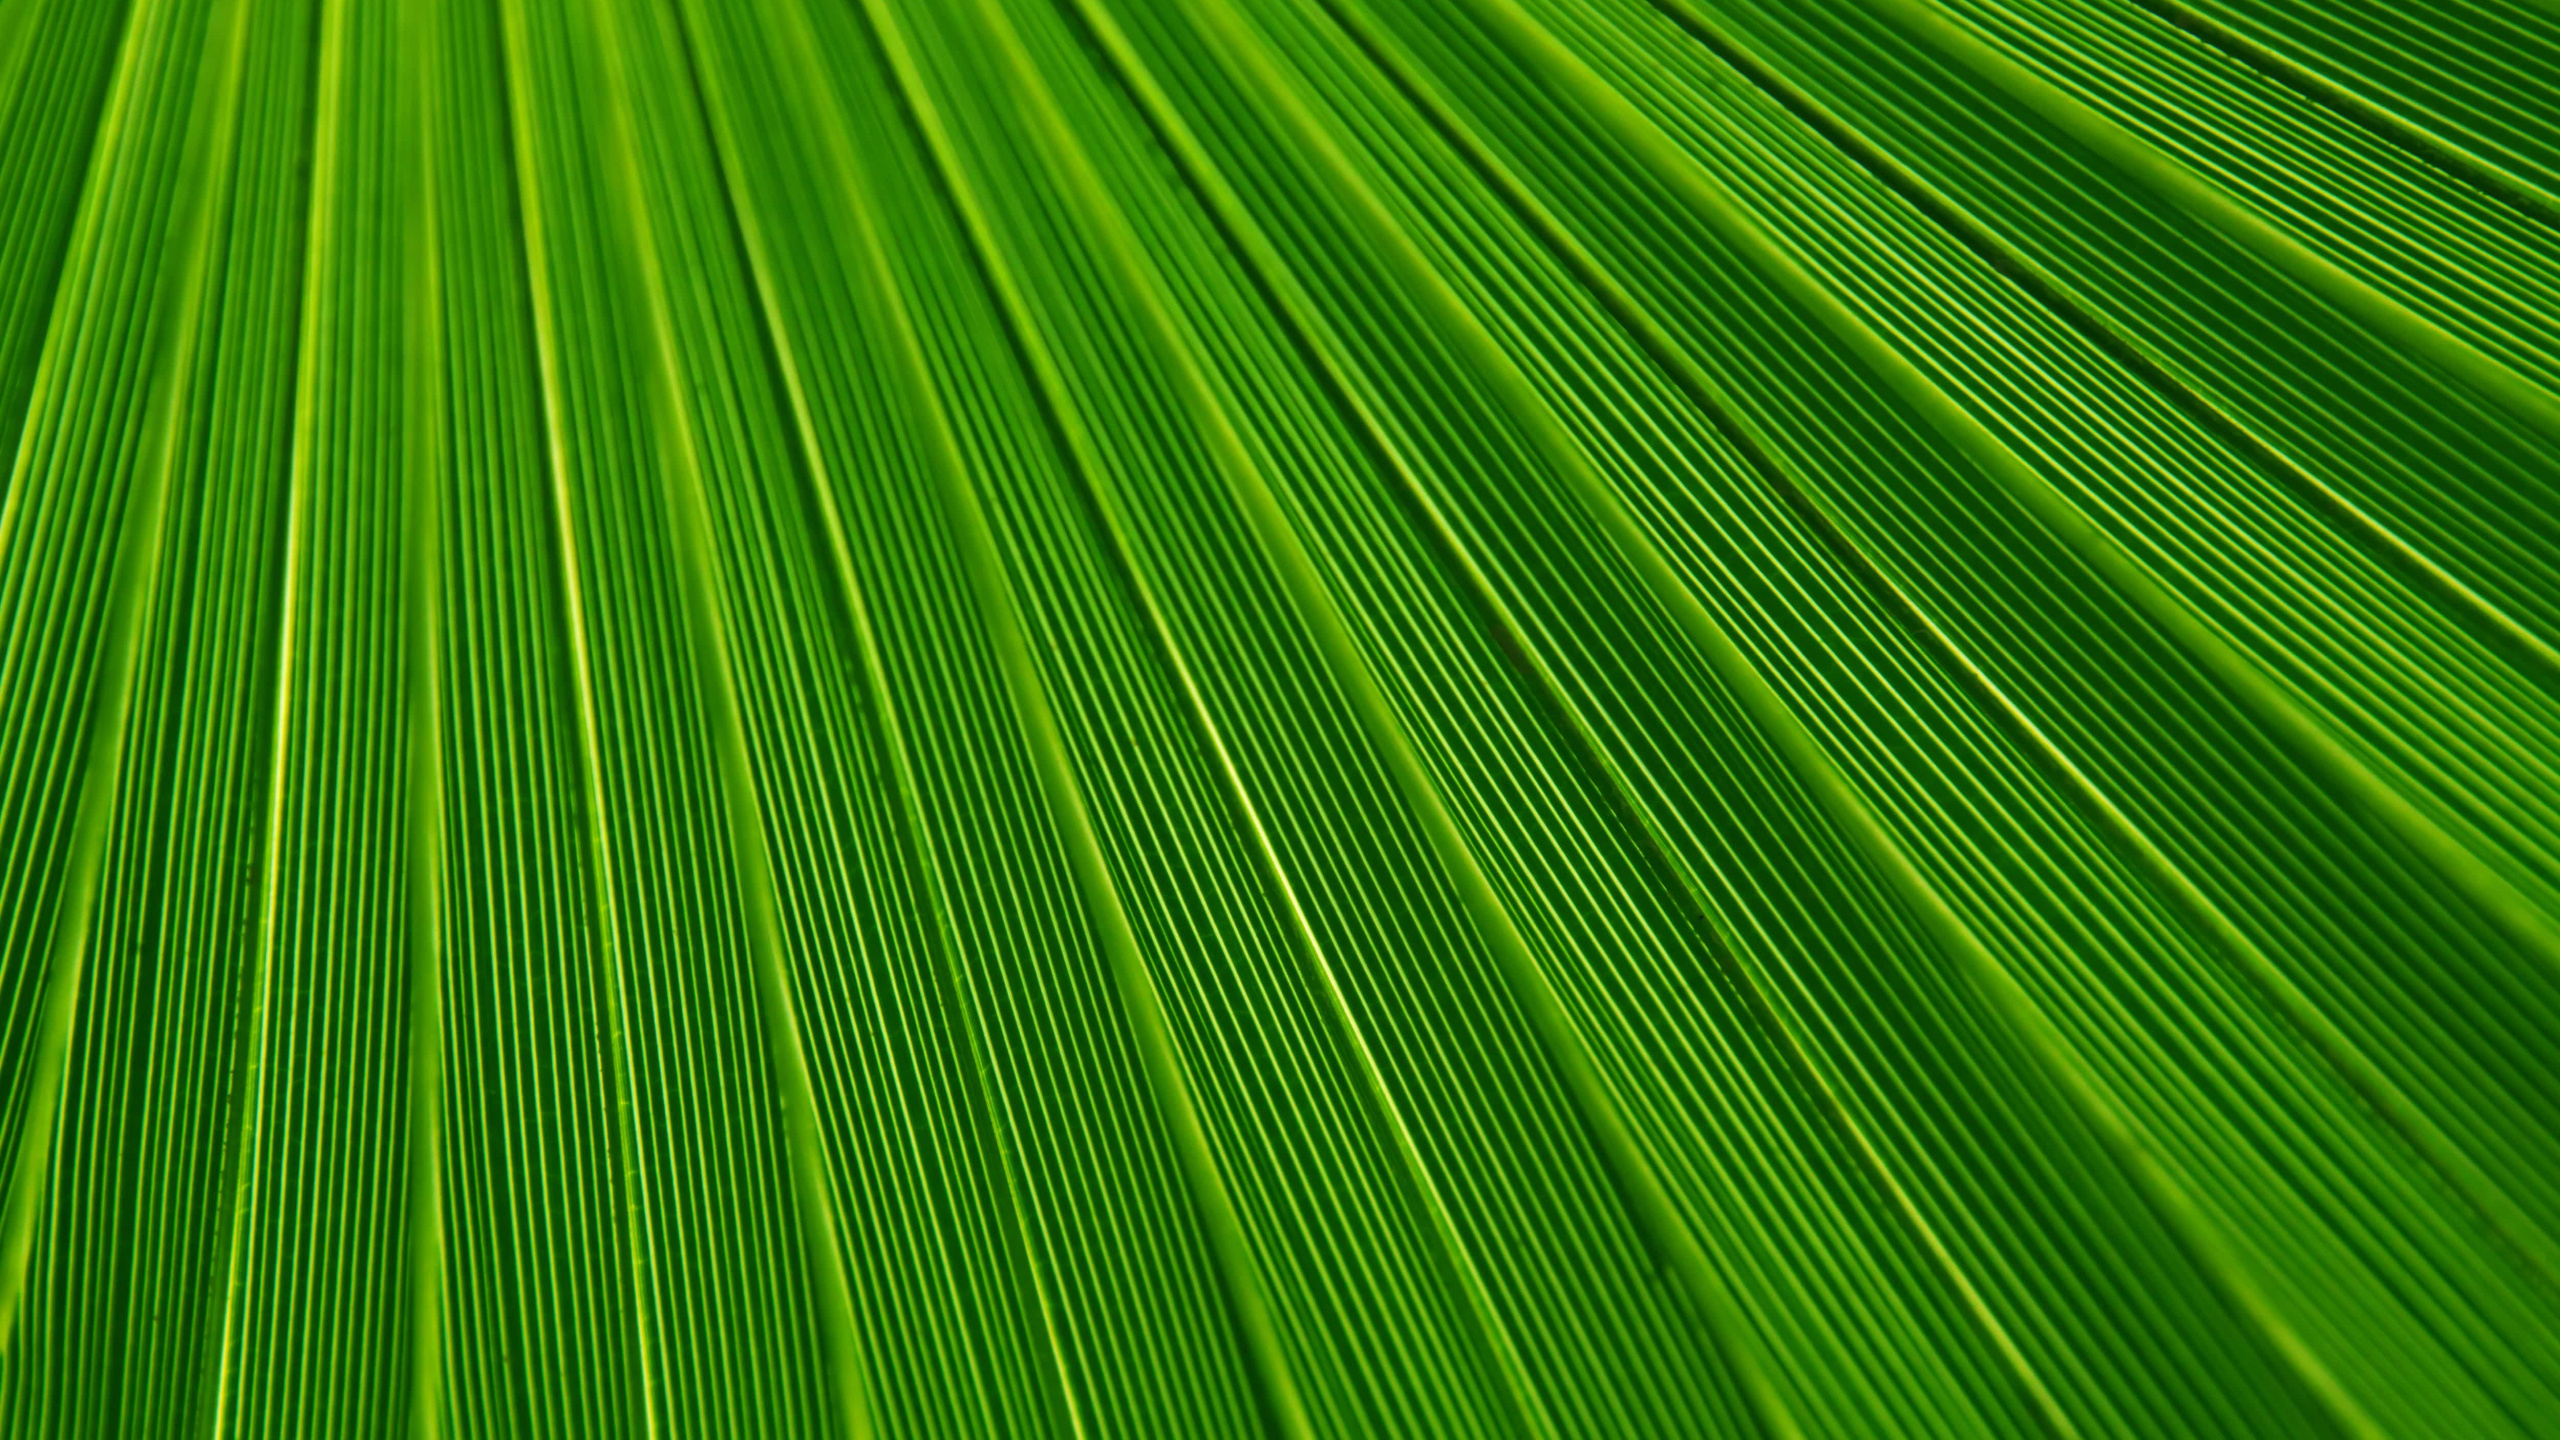 Green and Yellow Striped Textile. Wallpaper in 2560x1440 Resolution